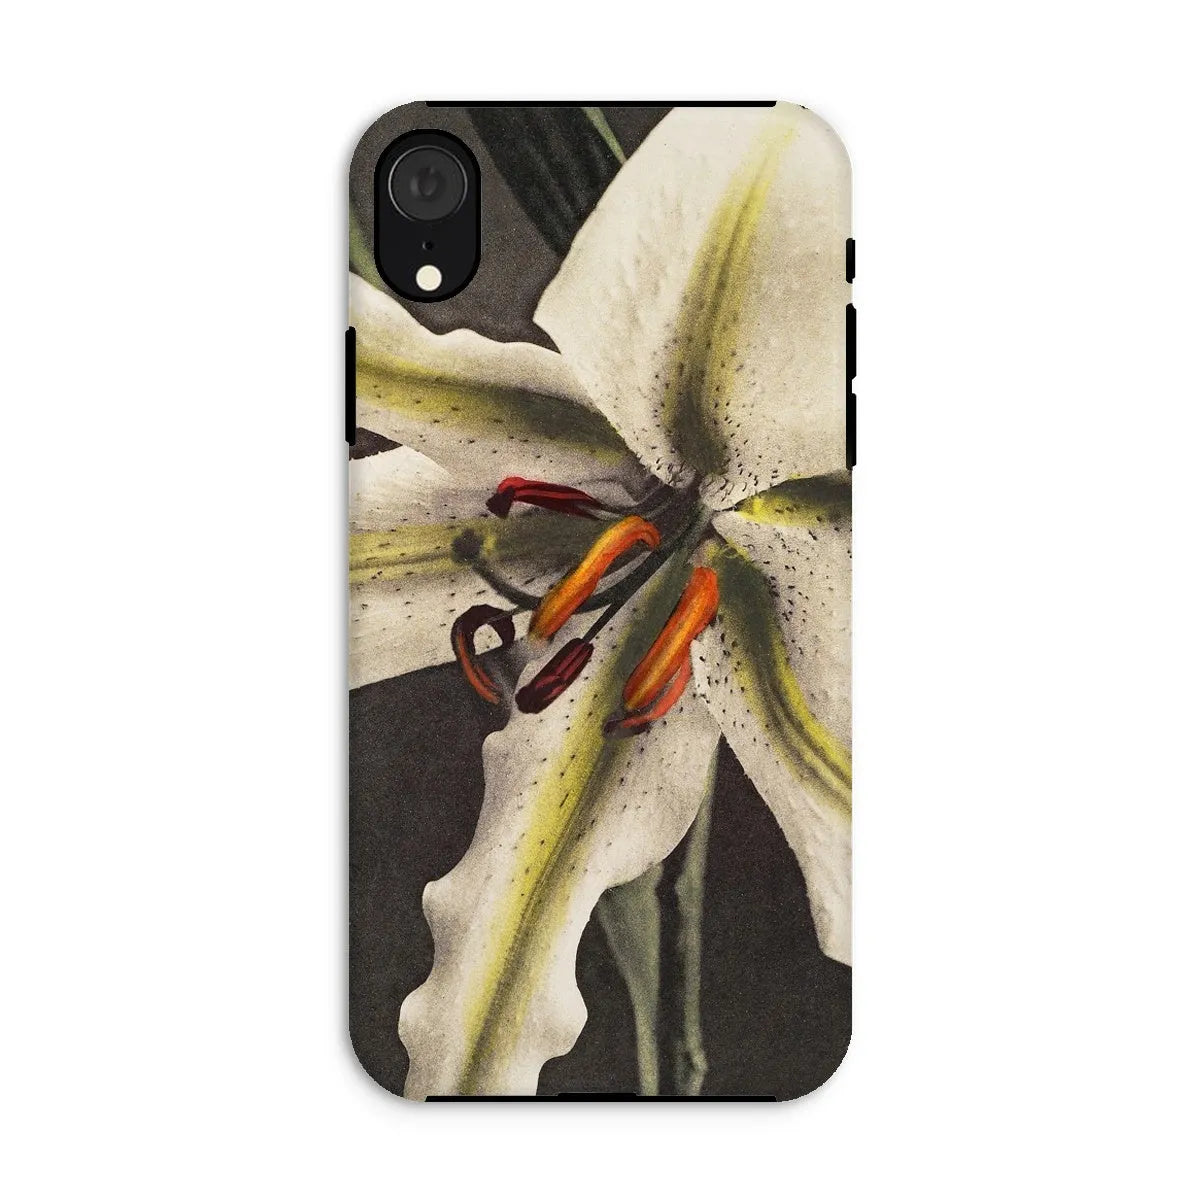 Lily By Kazumasa Ogawa Art Phone Case - Iphone Xr / Matte - Mobile Phone Cases - Aesthetic Art